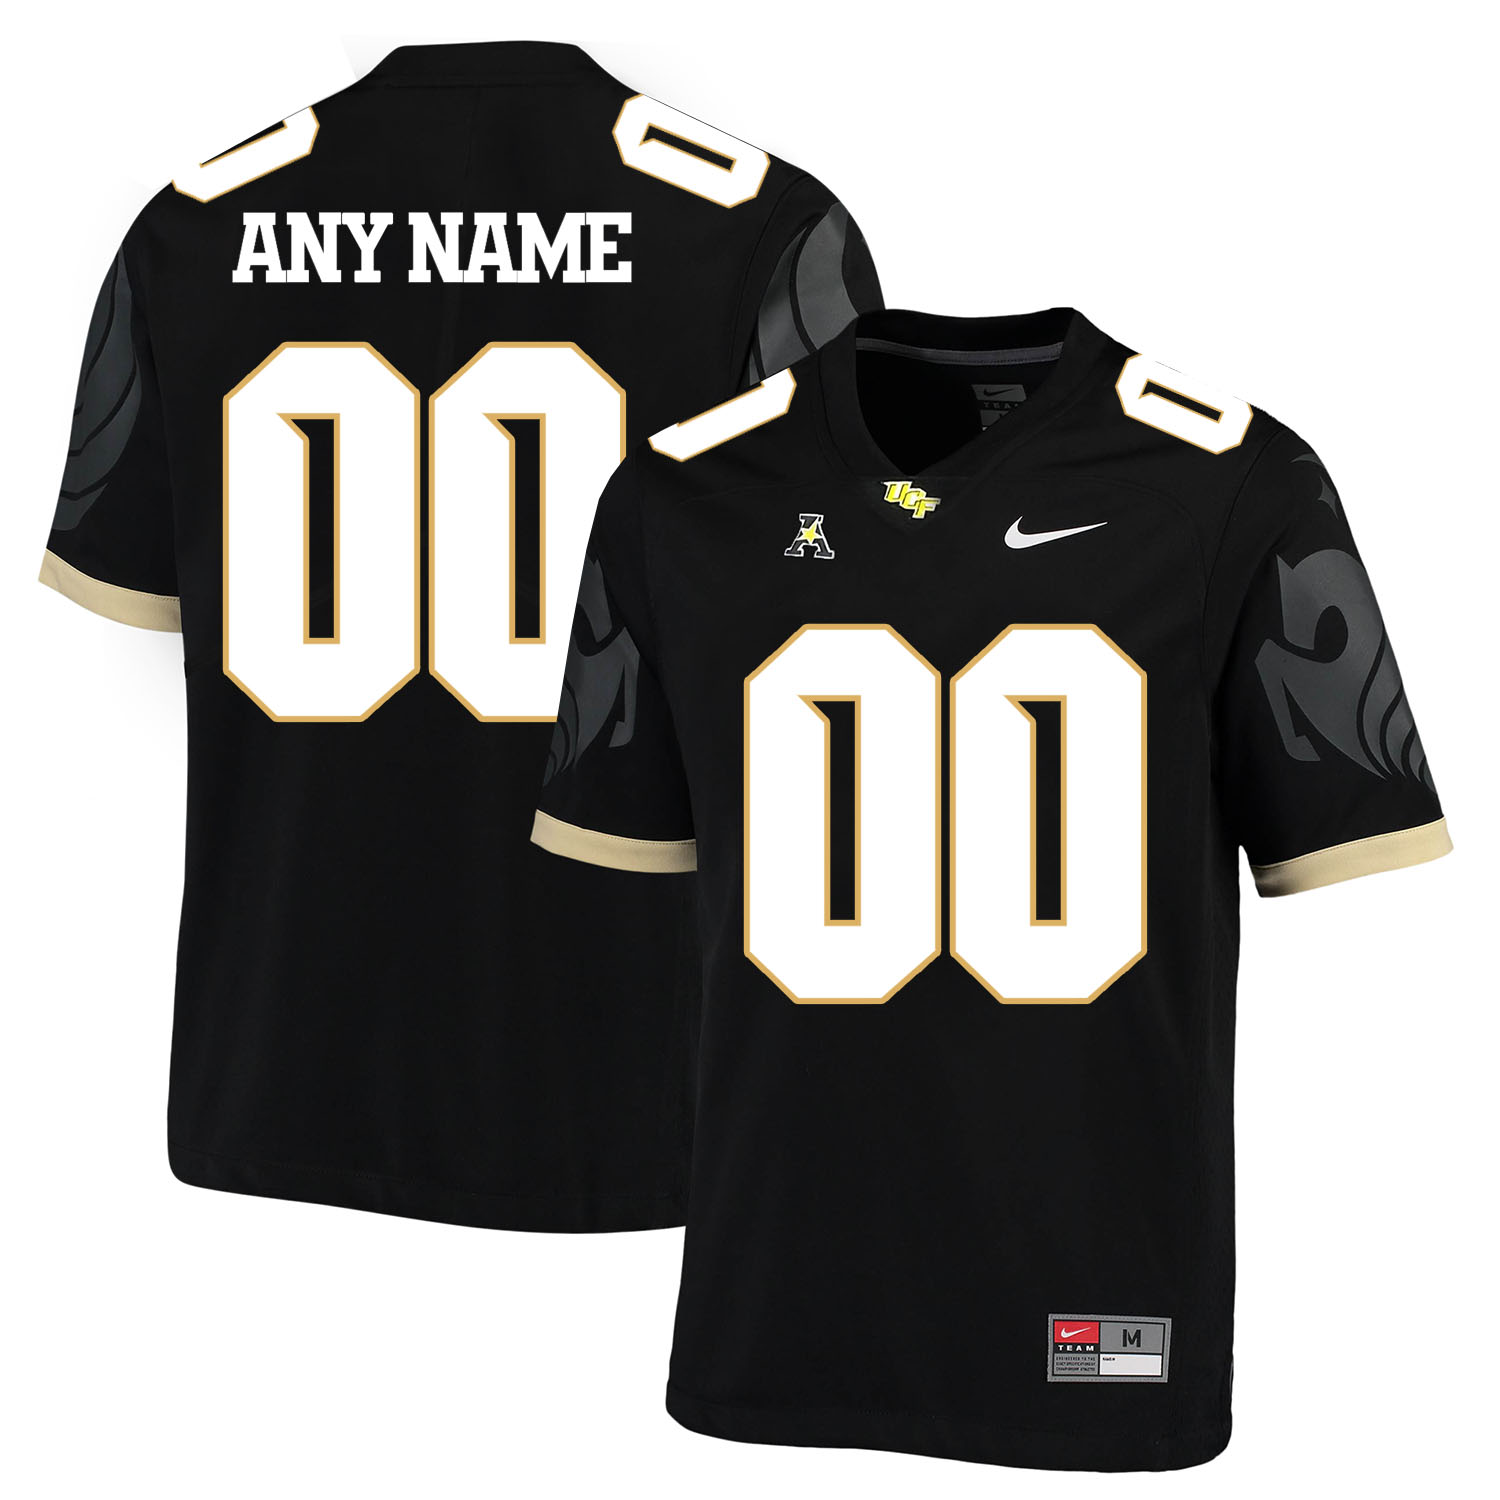 UCF Knights Black Men's Customized College Football Jersey